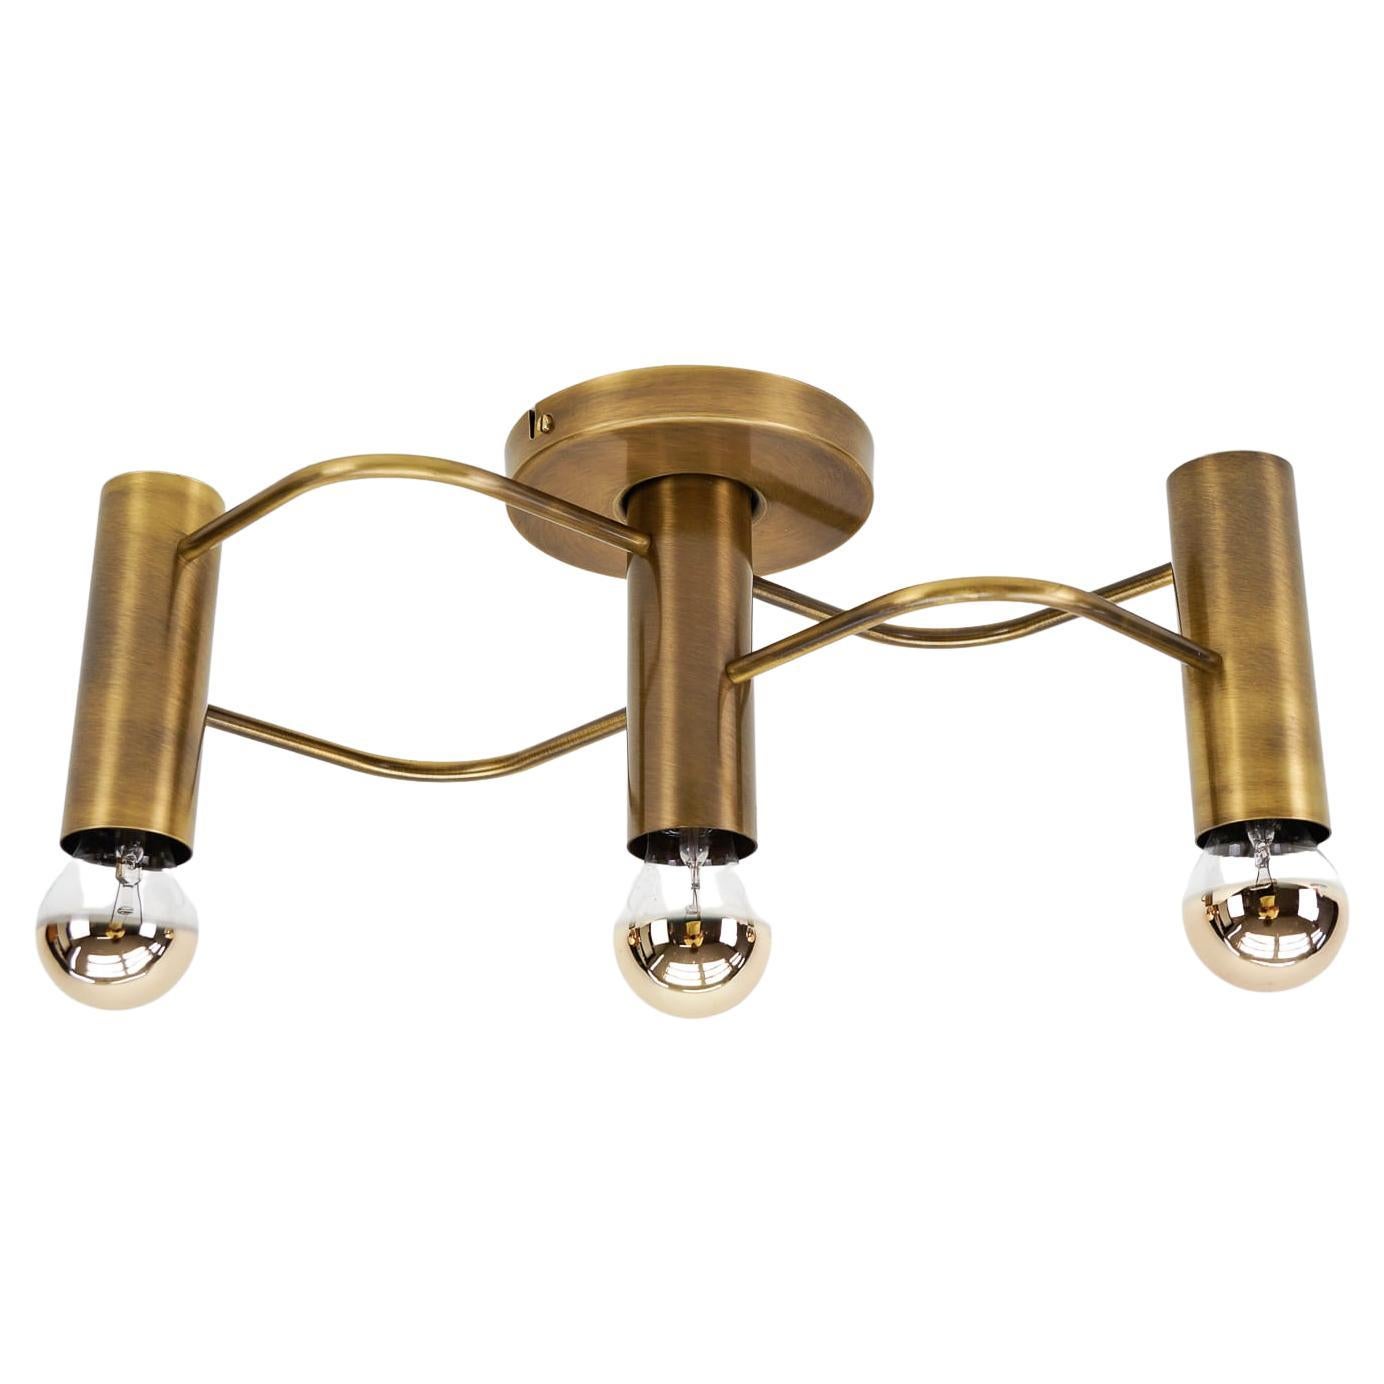 Set of Sculptural Ceiling and Wall Light Flush Mount Chandelier by Leola, 1960s